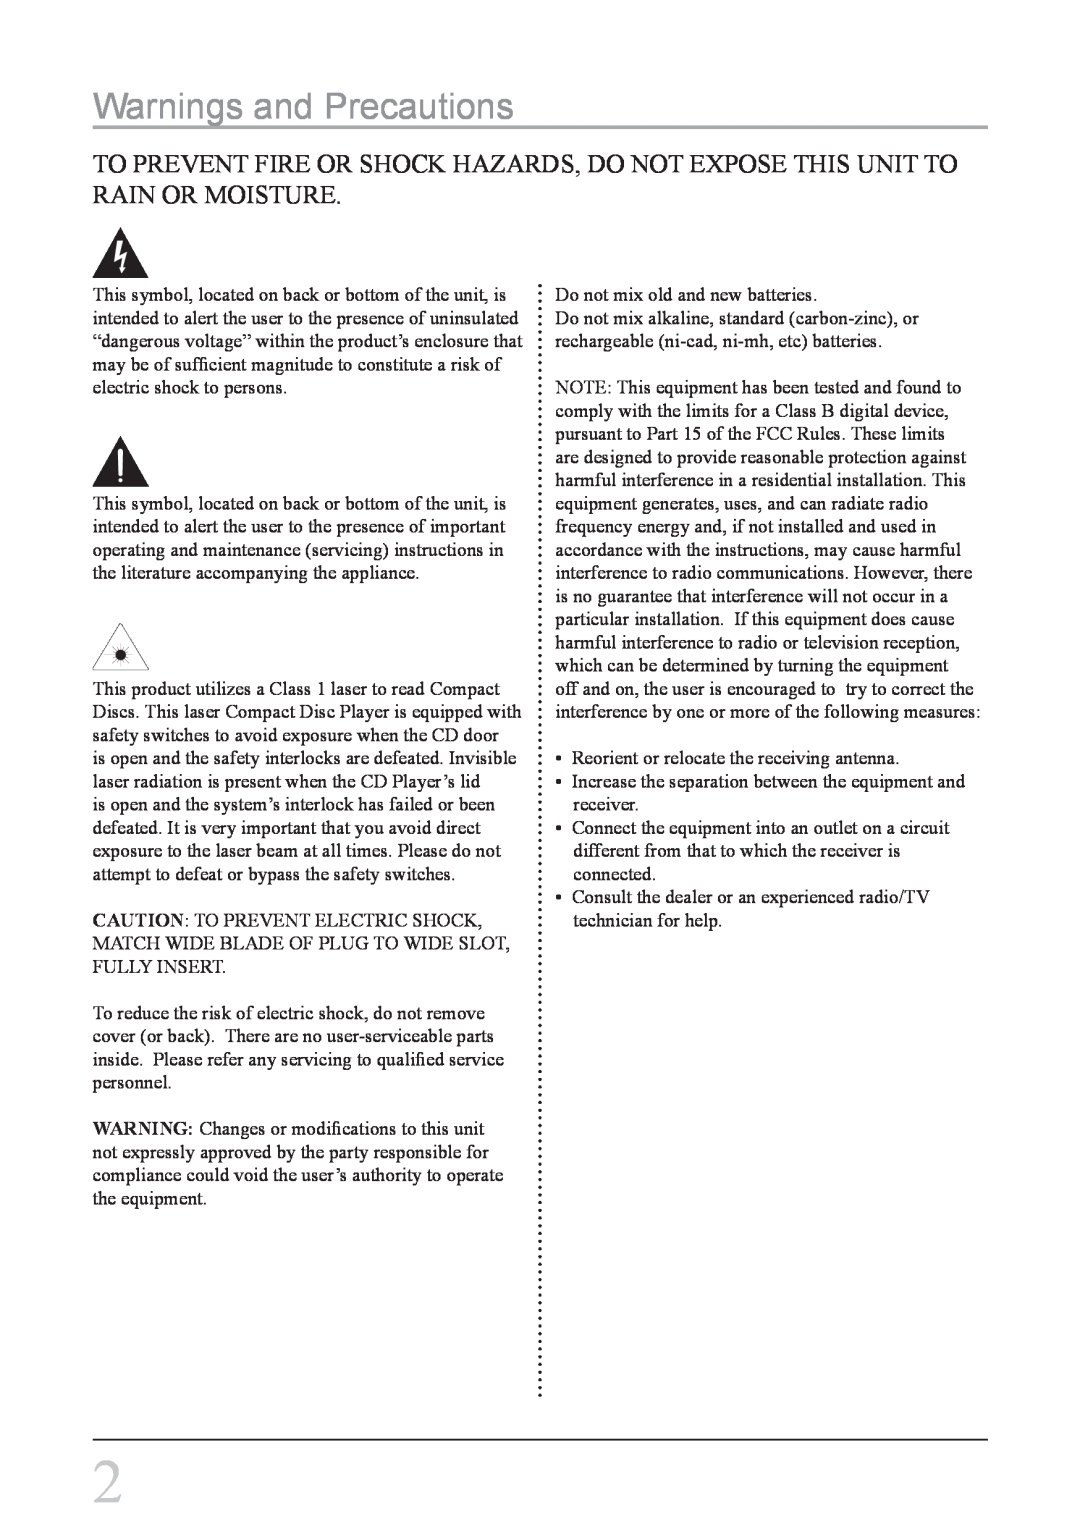 GPX PC108B instruction manual Warnings and Precautions 